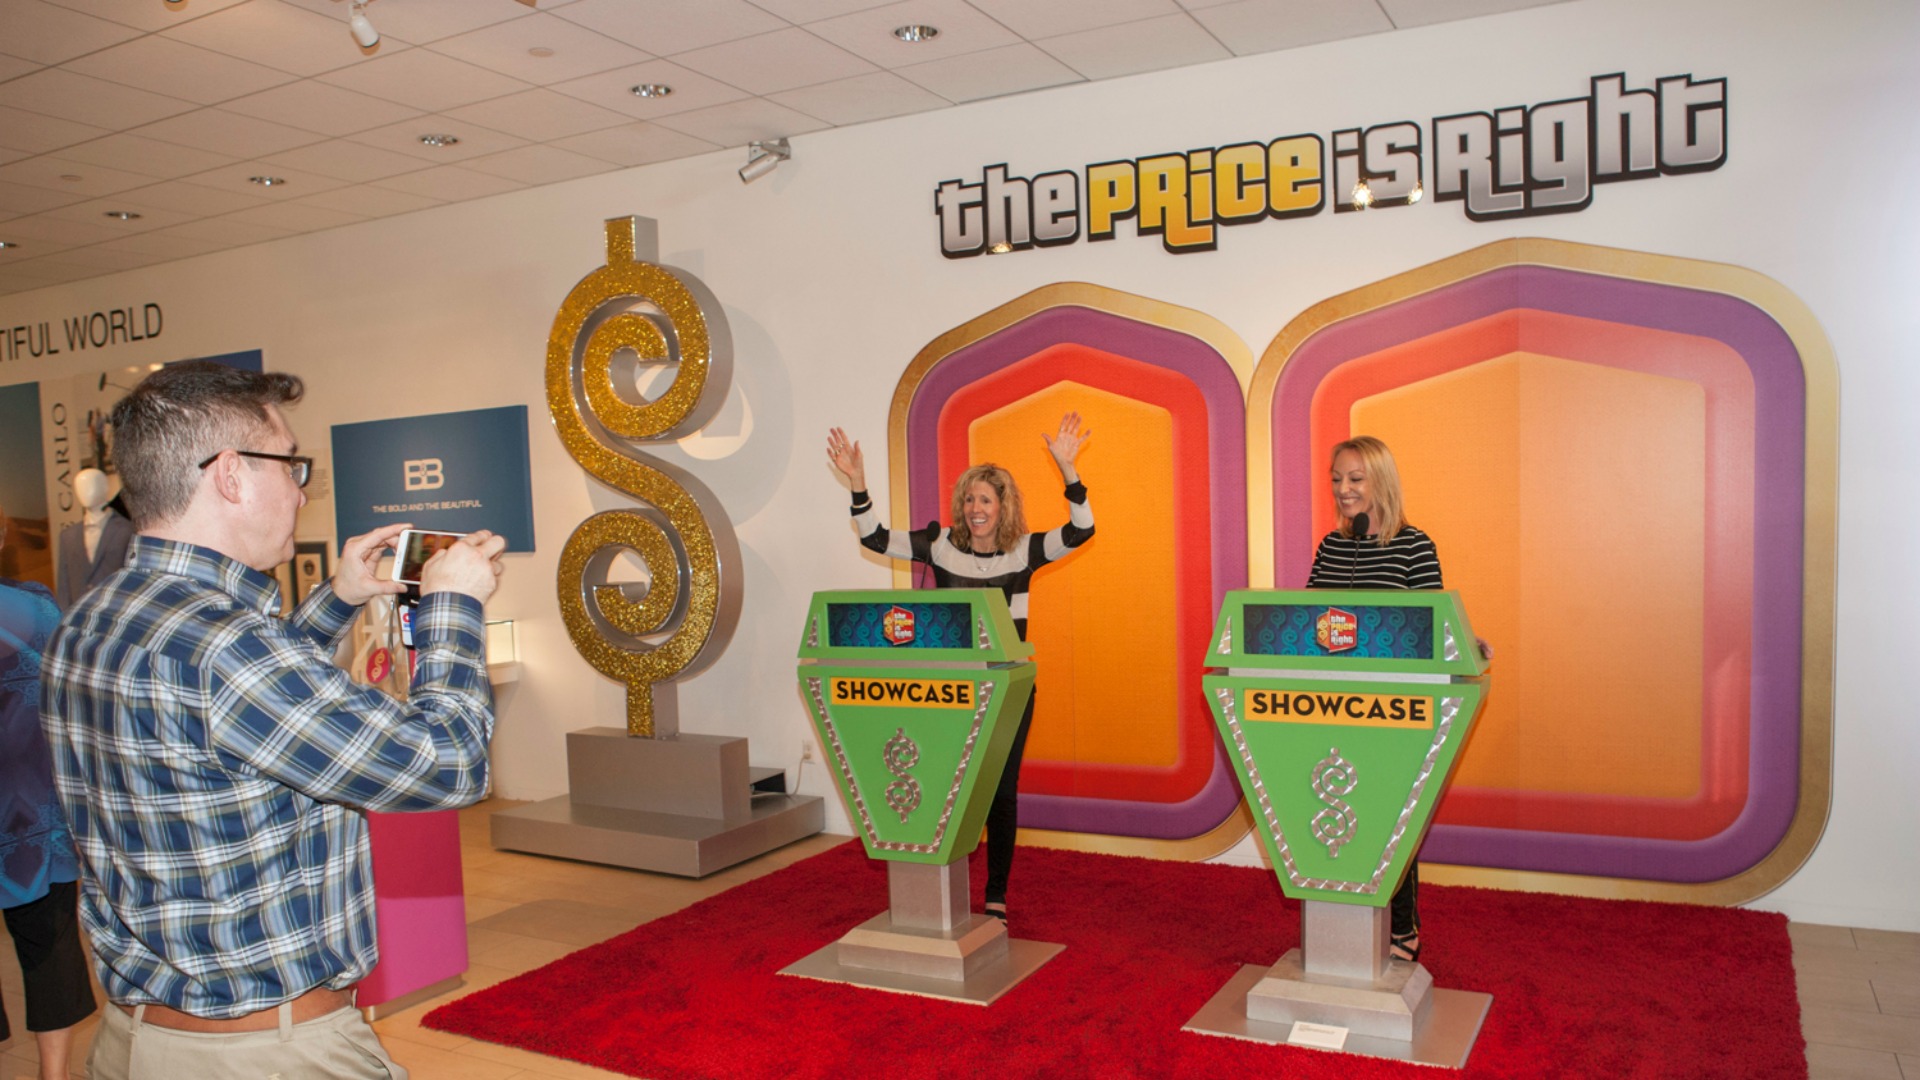 Two fans check out The Price Is Right Showcase podiums.